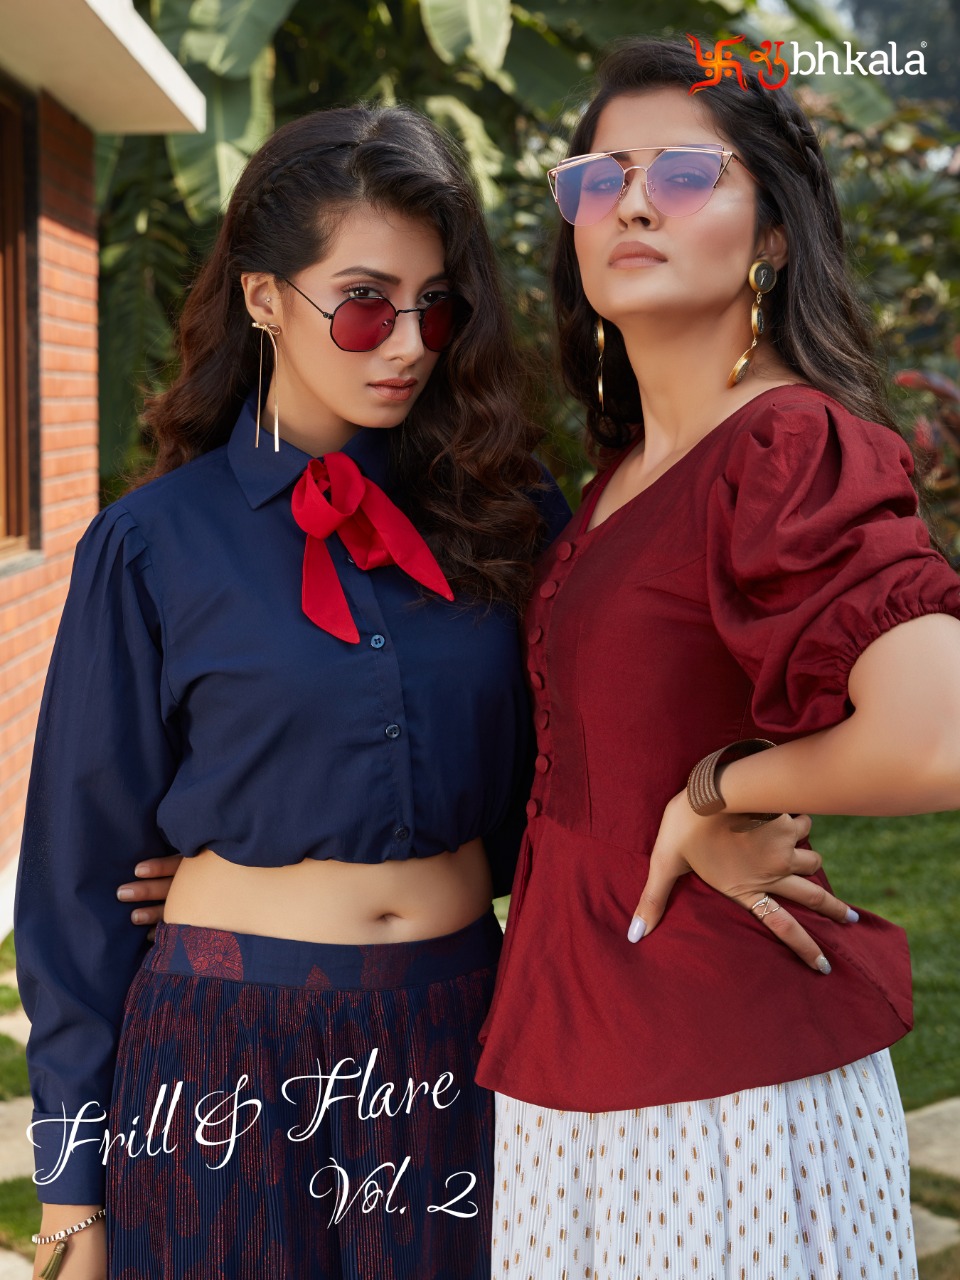 Shubh Kala Frill And Flare Vol 2 Cotton Imported Crop Top With Skirt